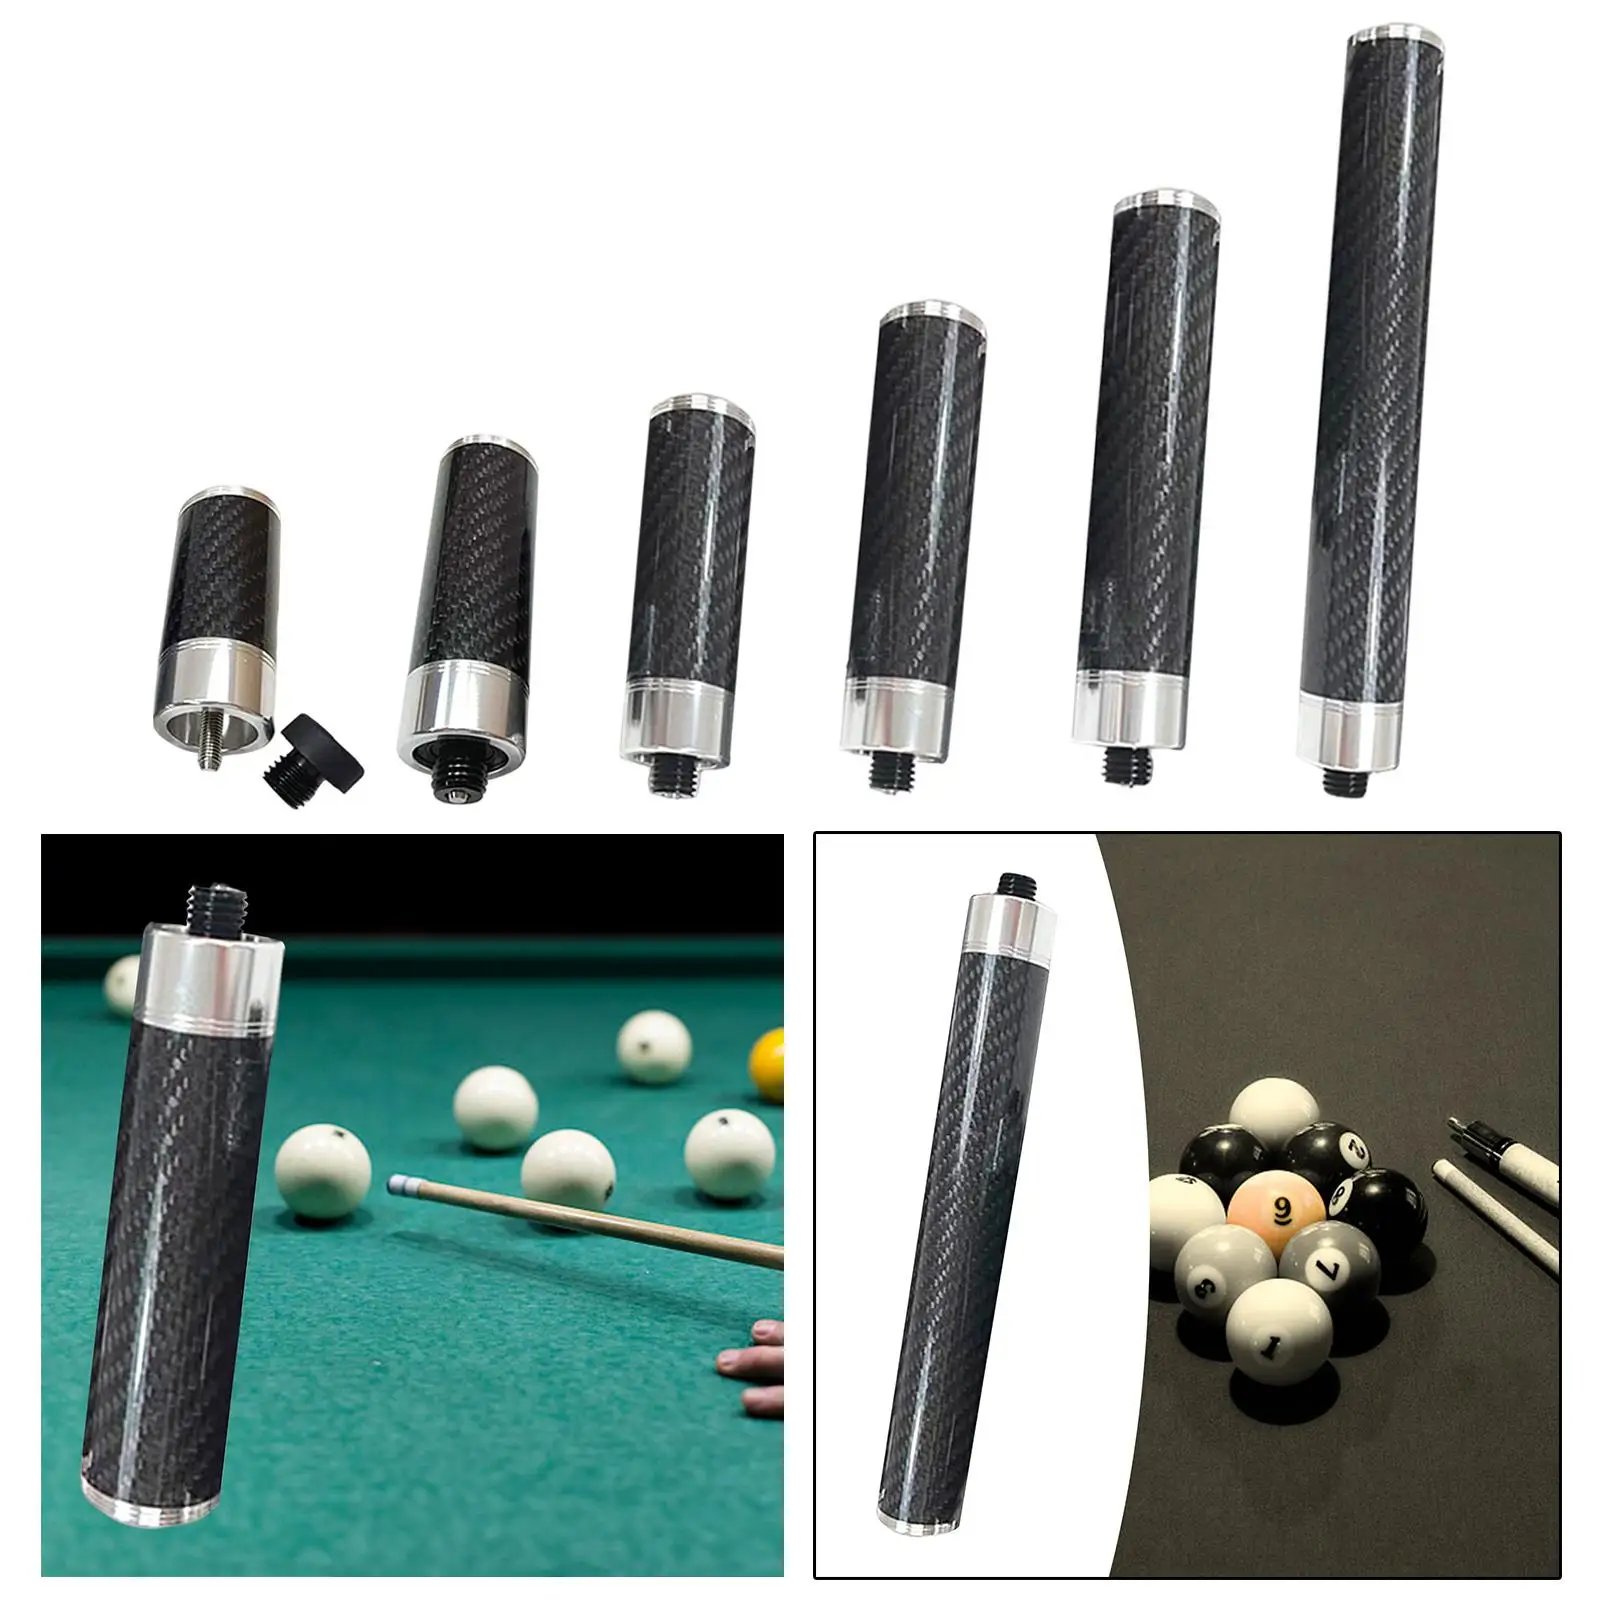 Billiards Pool Cue Extension Snooker Cue Extended Dia 1.3in Cue End Adapter with